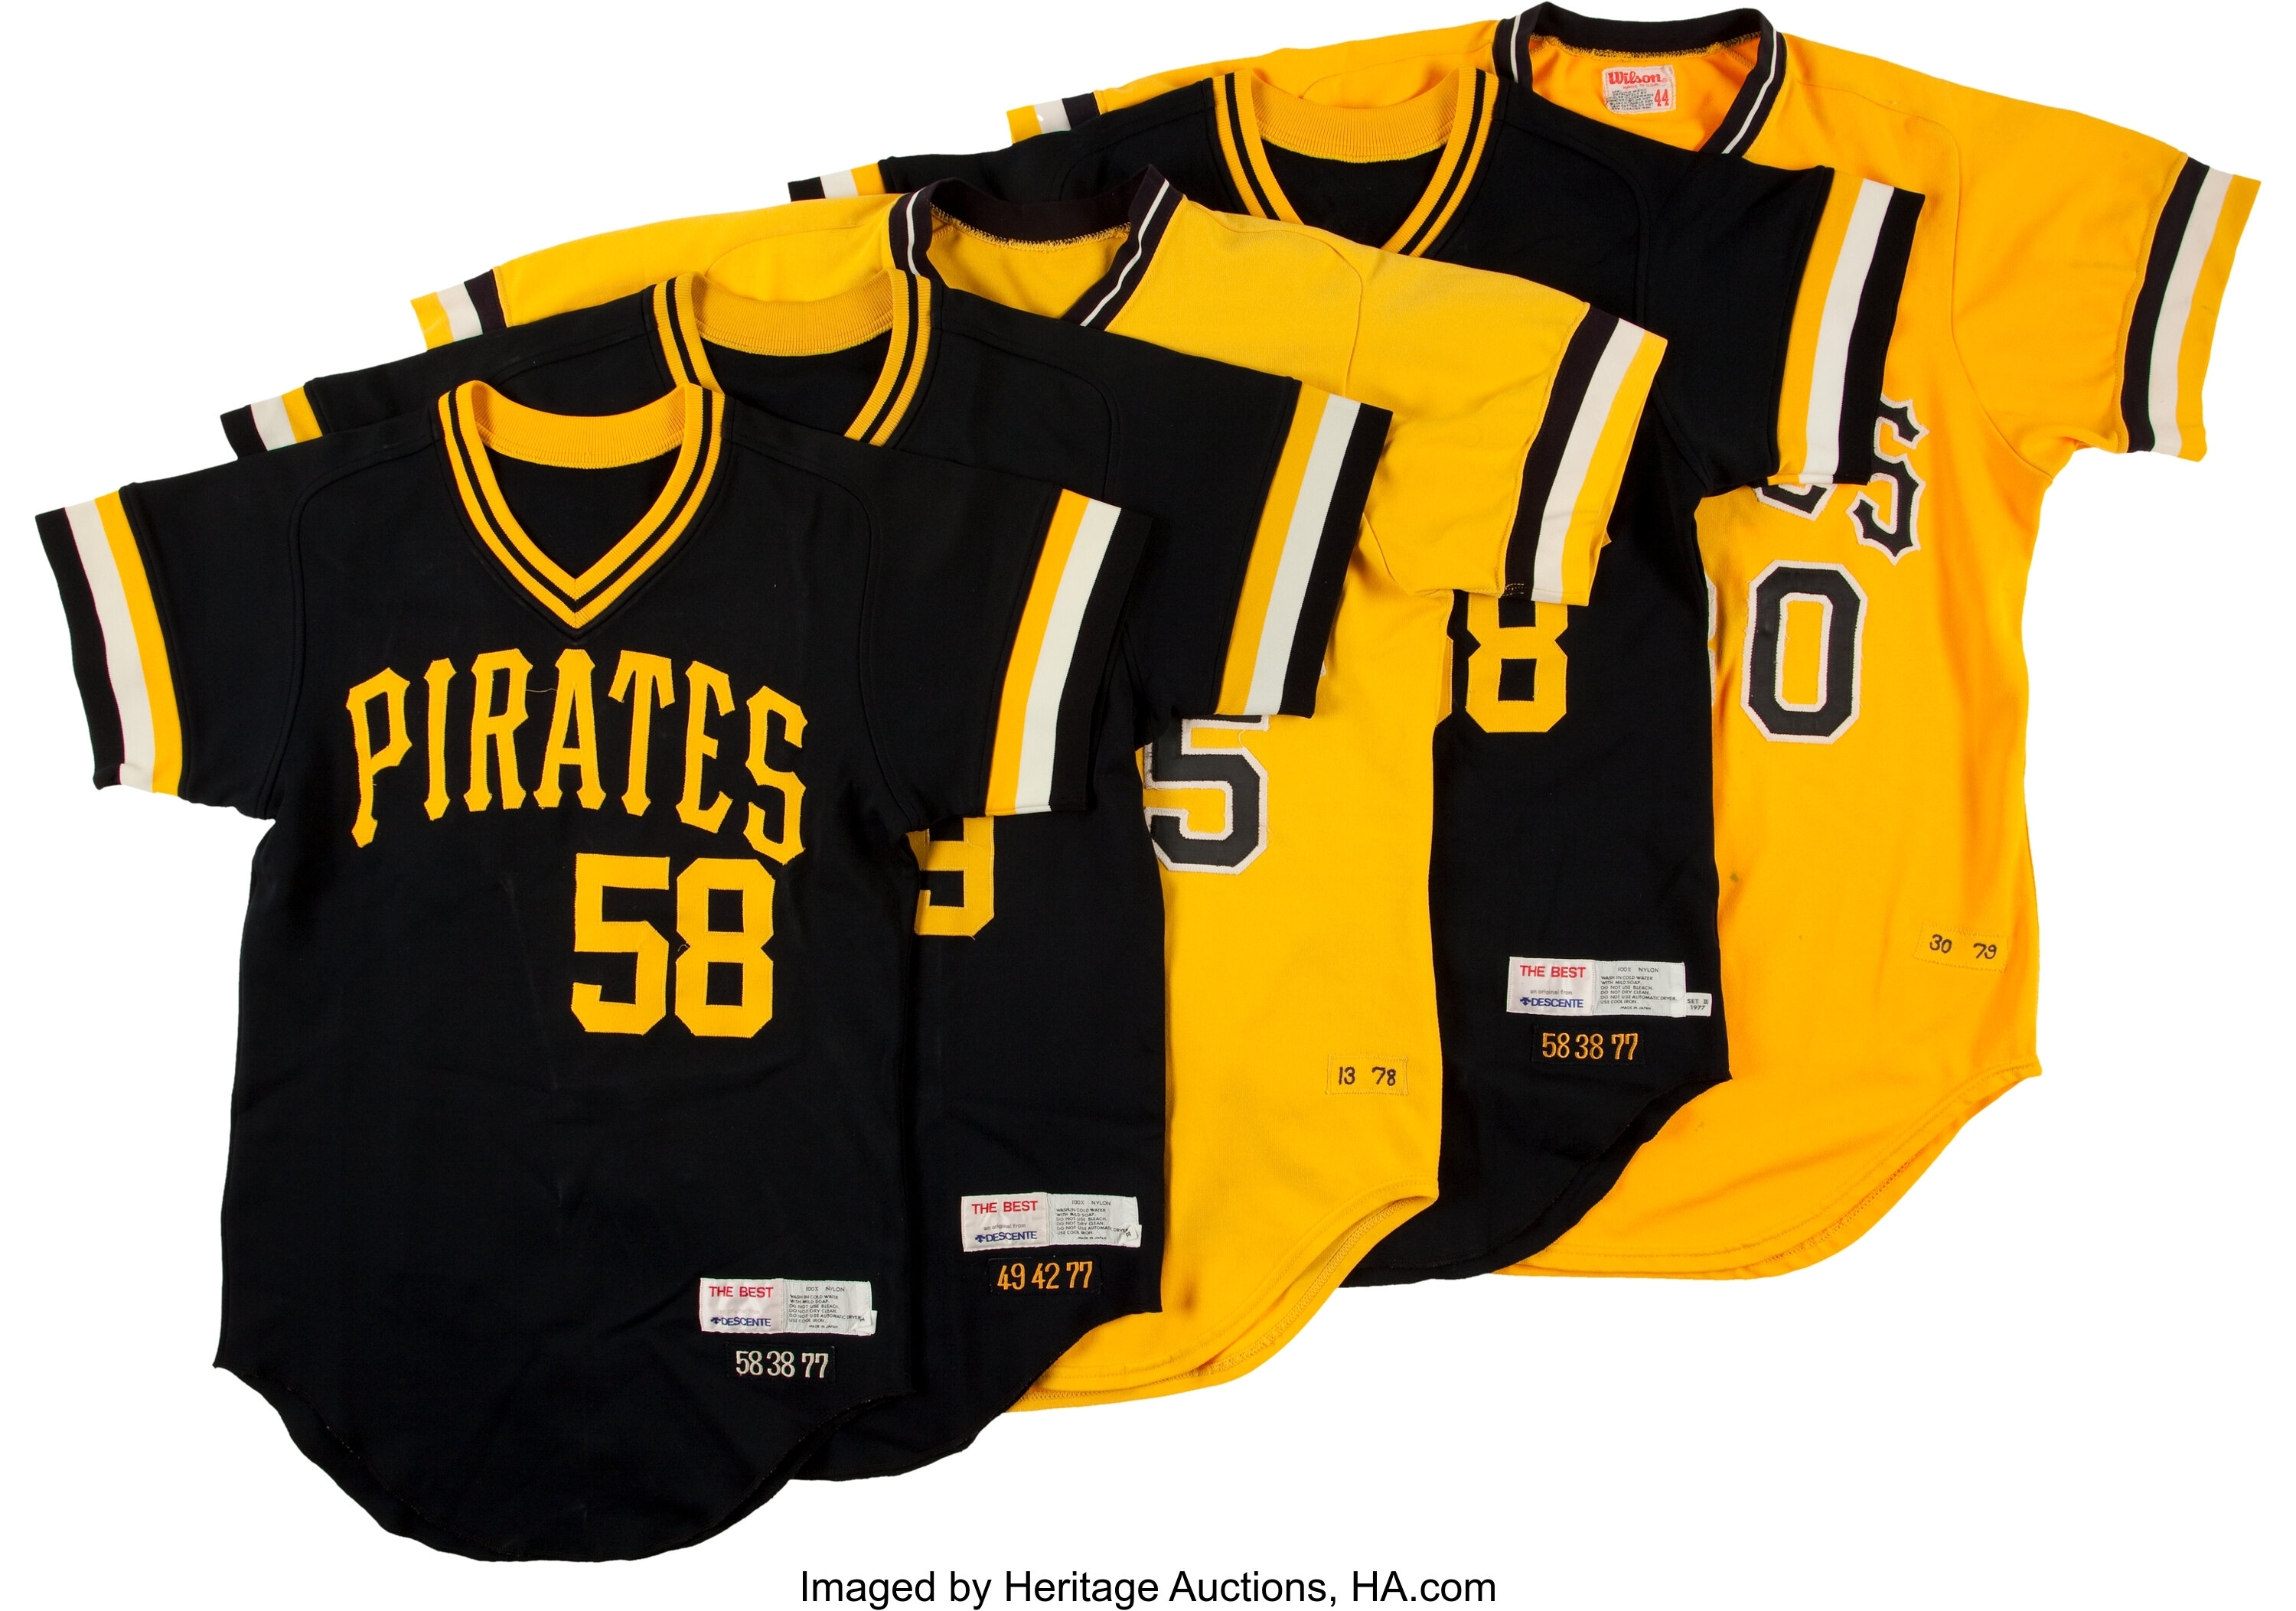 How the Pittsburgh Pirates sparked a uniform revolution in the 1970s - ESPN